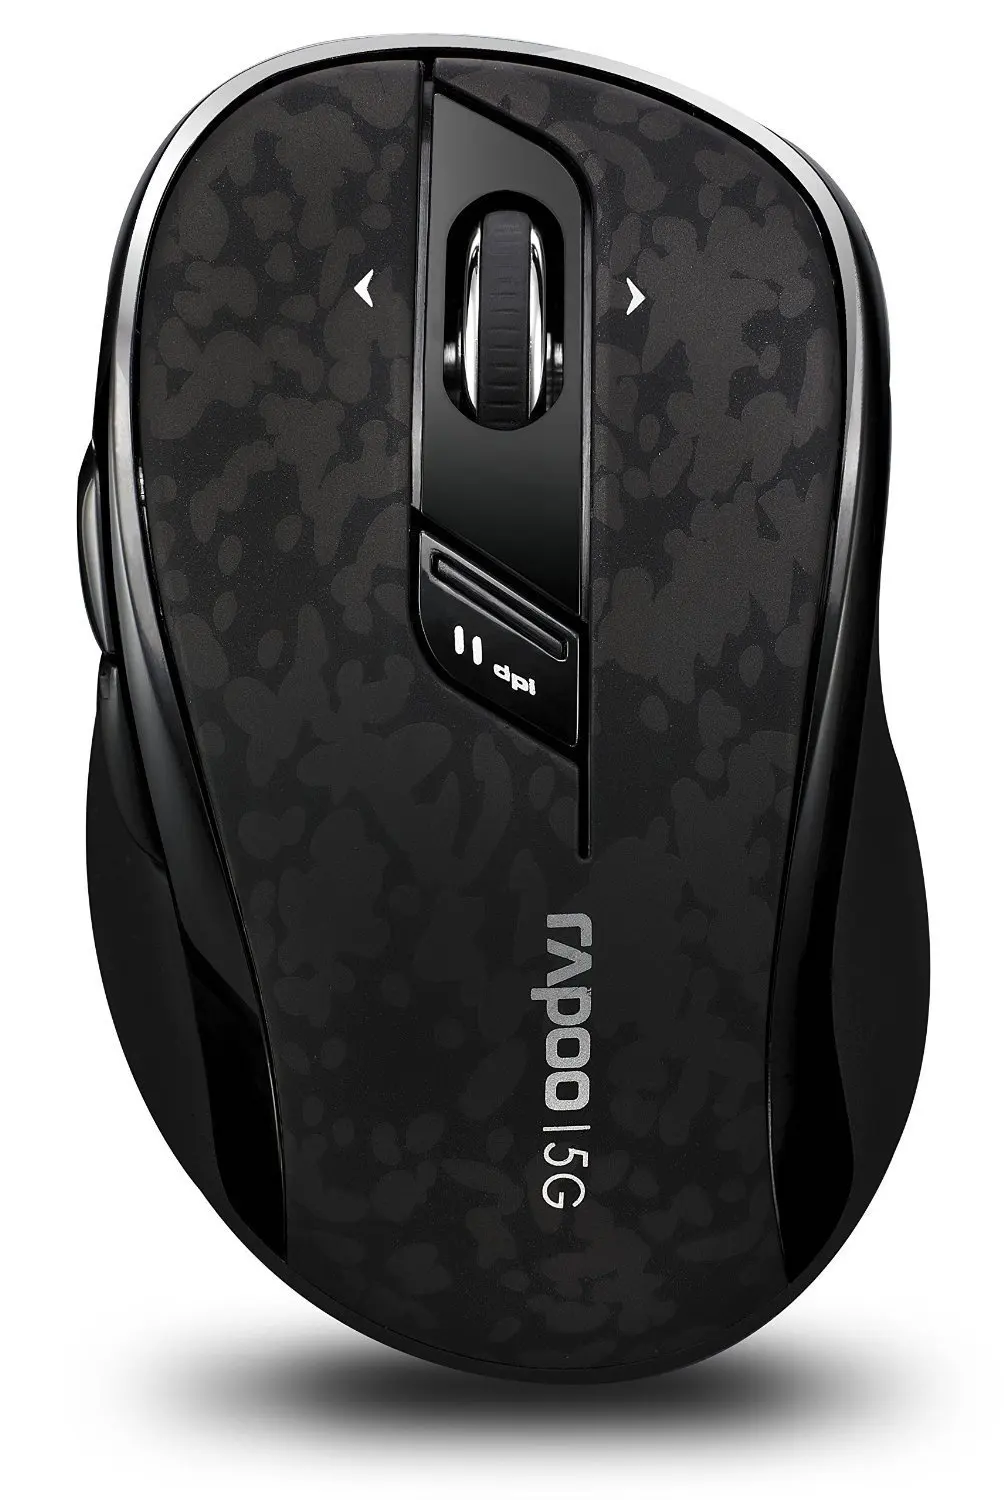 Rapoo mouse driver for mac windows 7